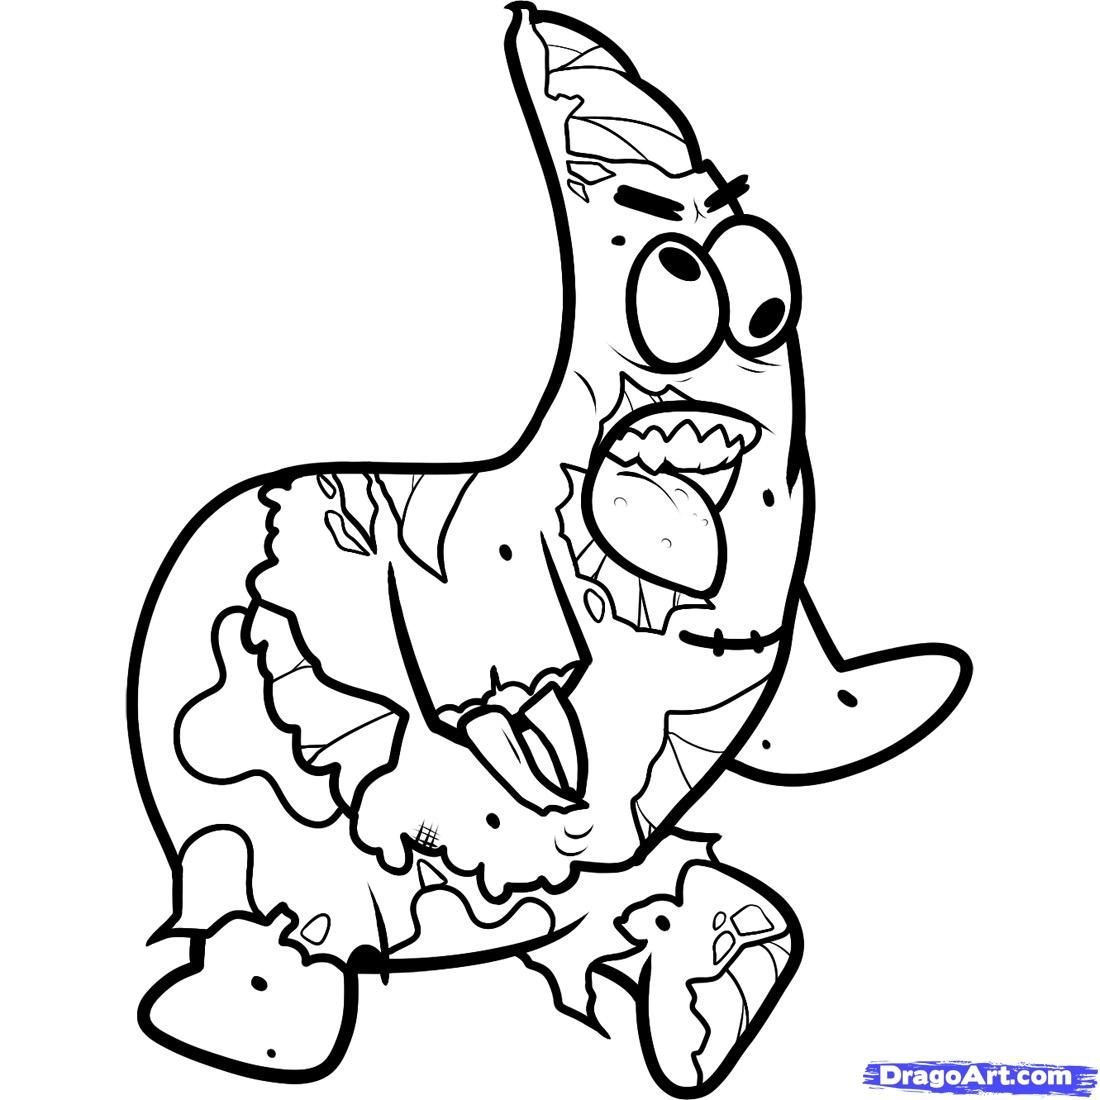 Cartoon Zombie Coloring Pages at GetColorings.com | Free printable